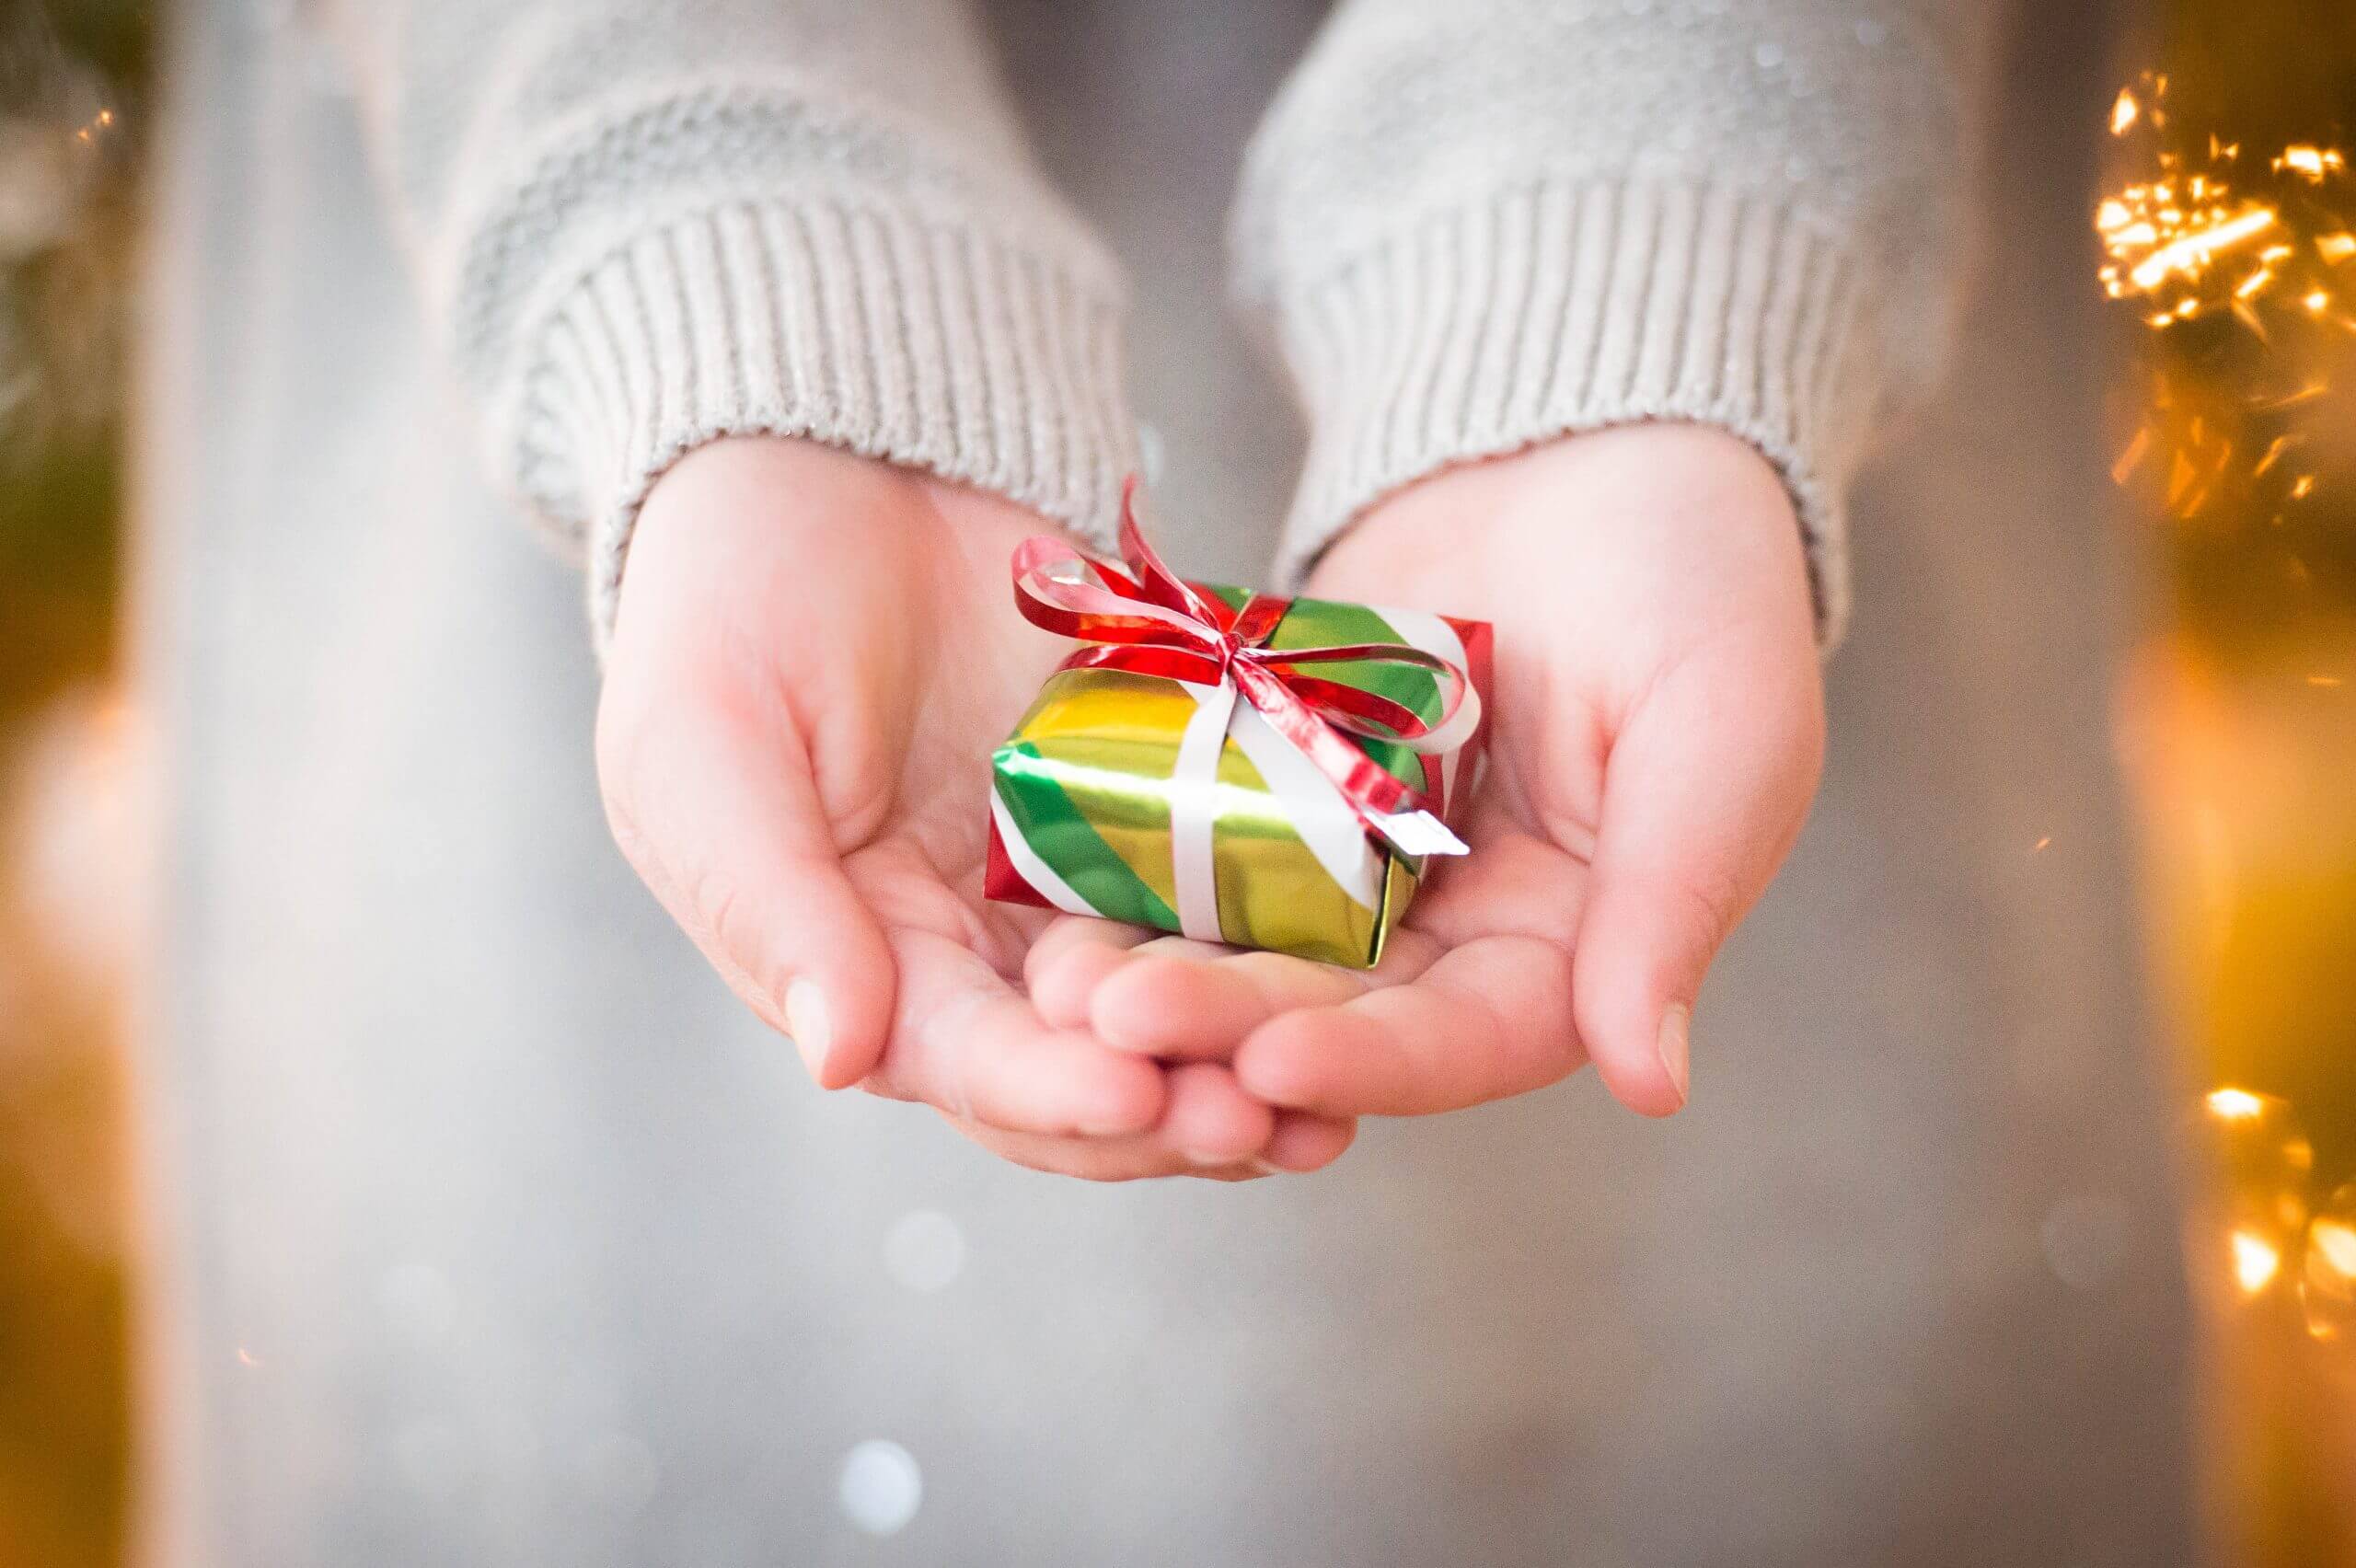 A view of hands holding out a gift.